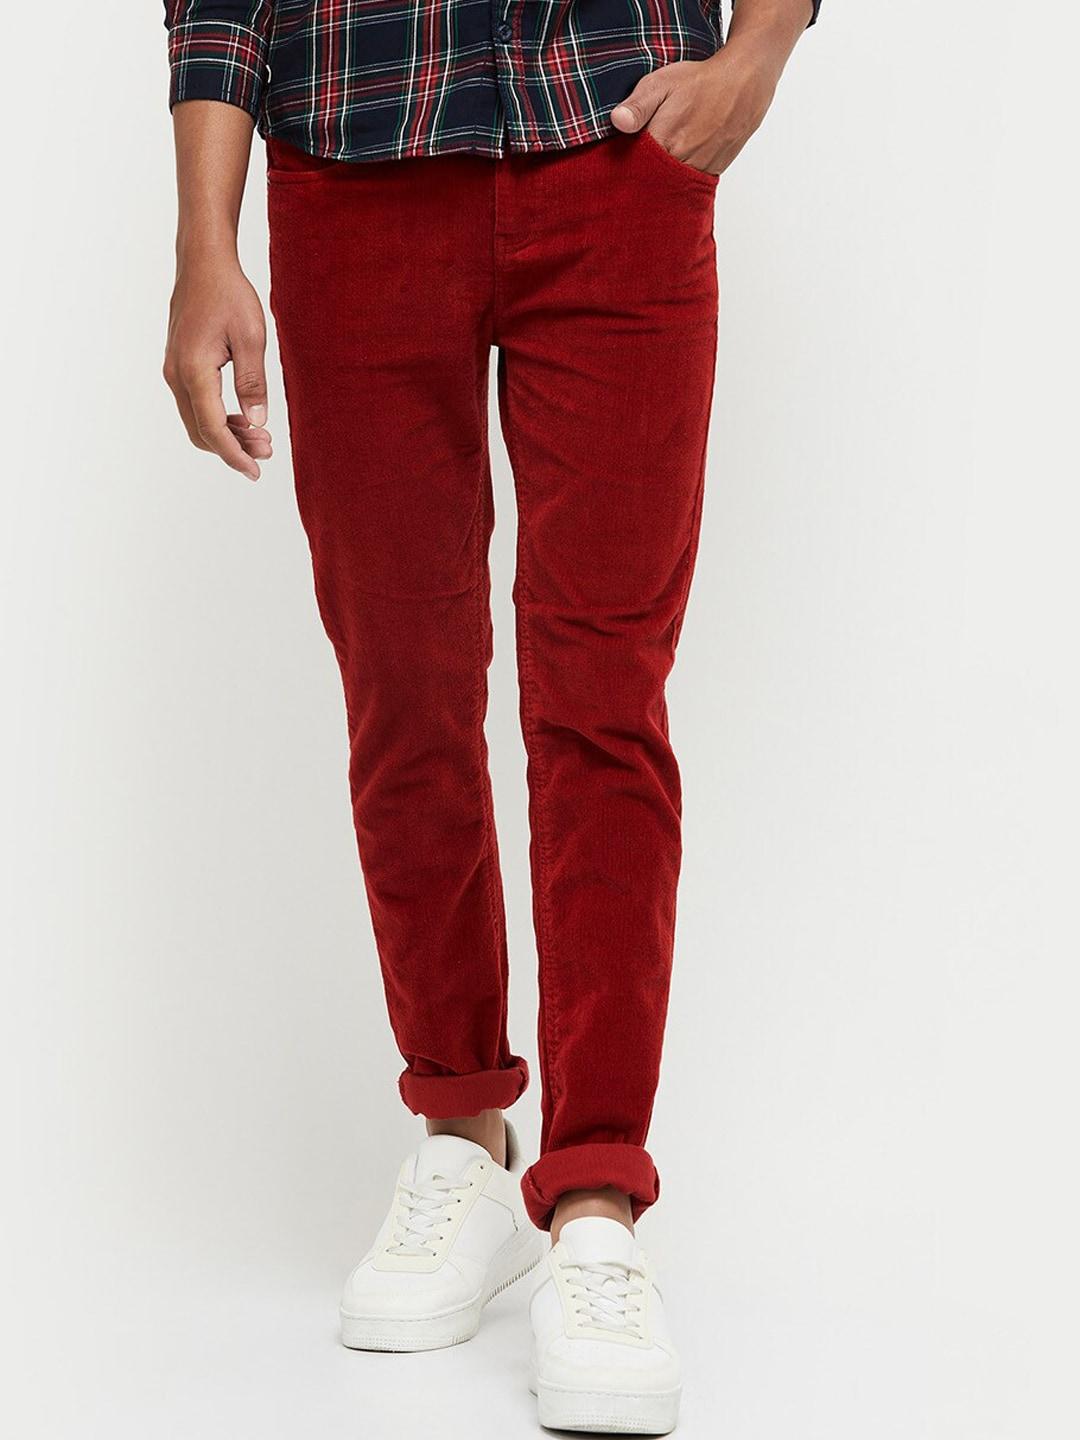 max Boys Red Cotton Chinos Trousers